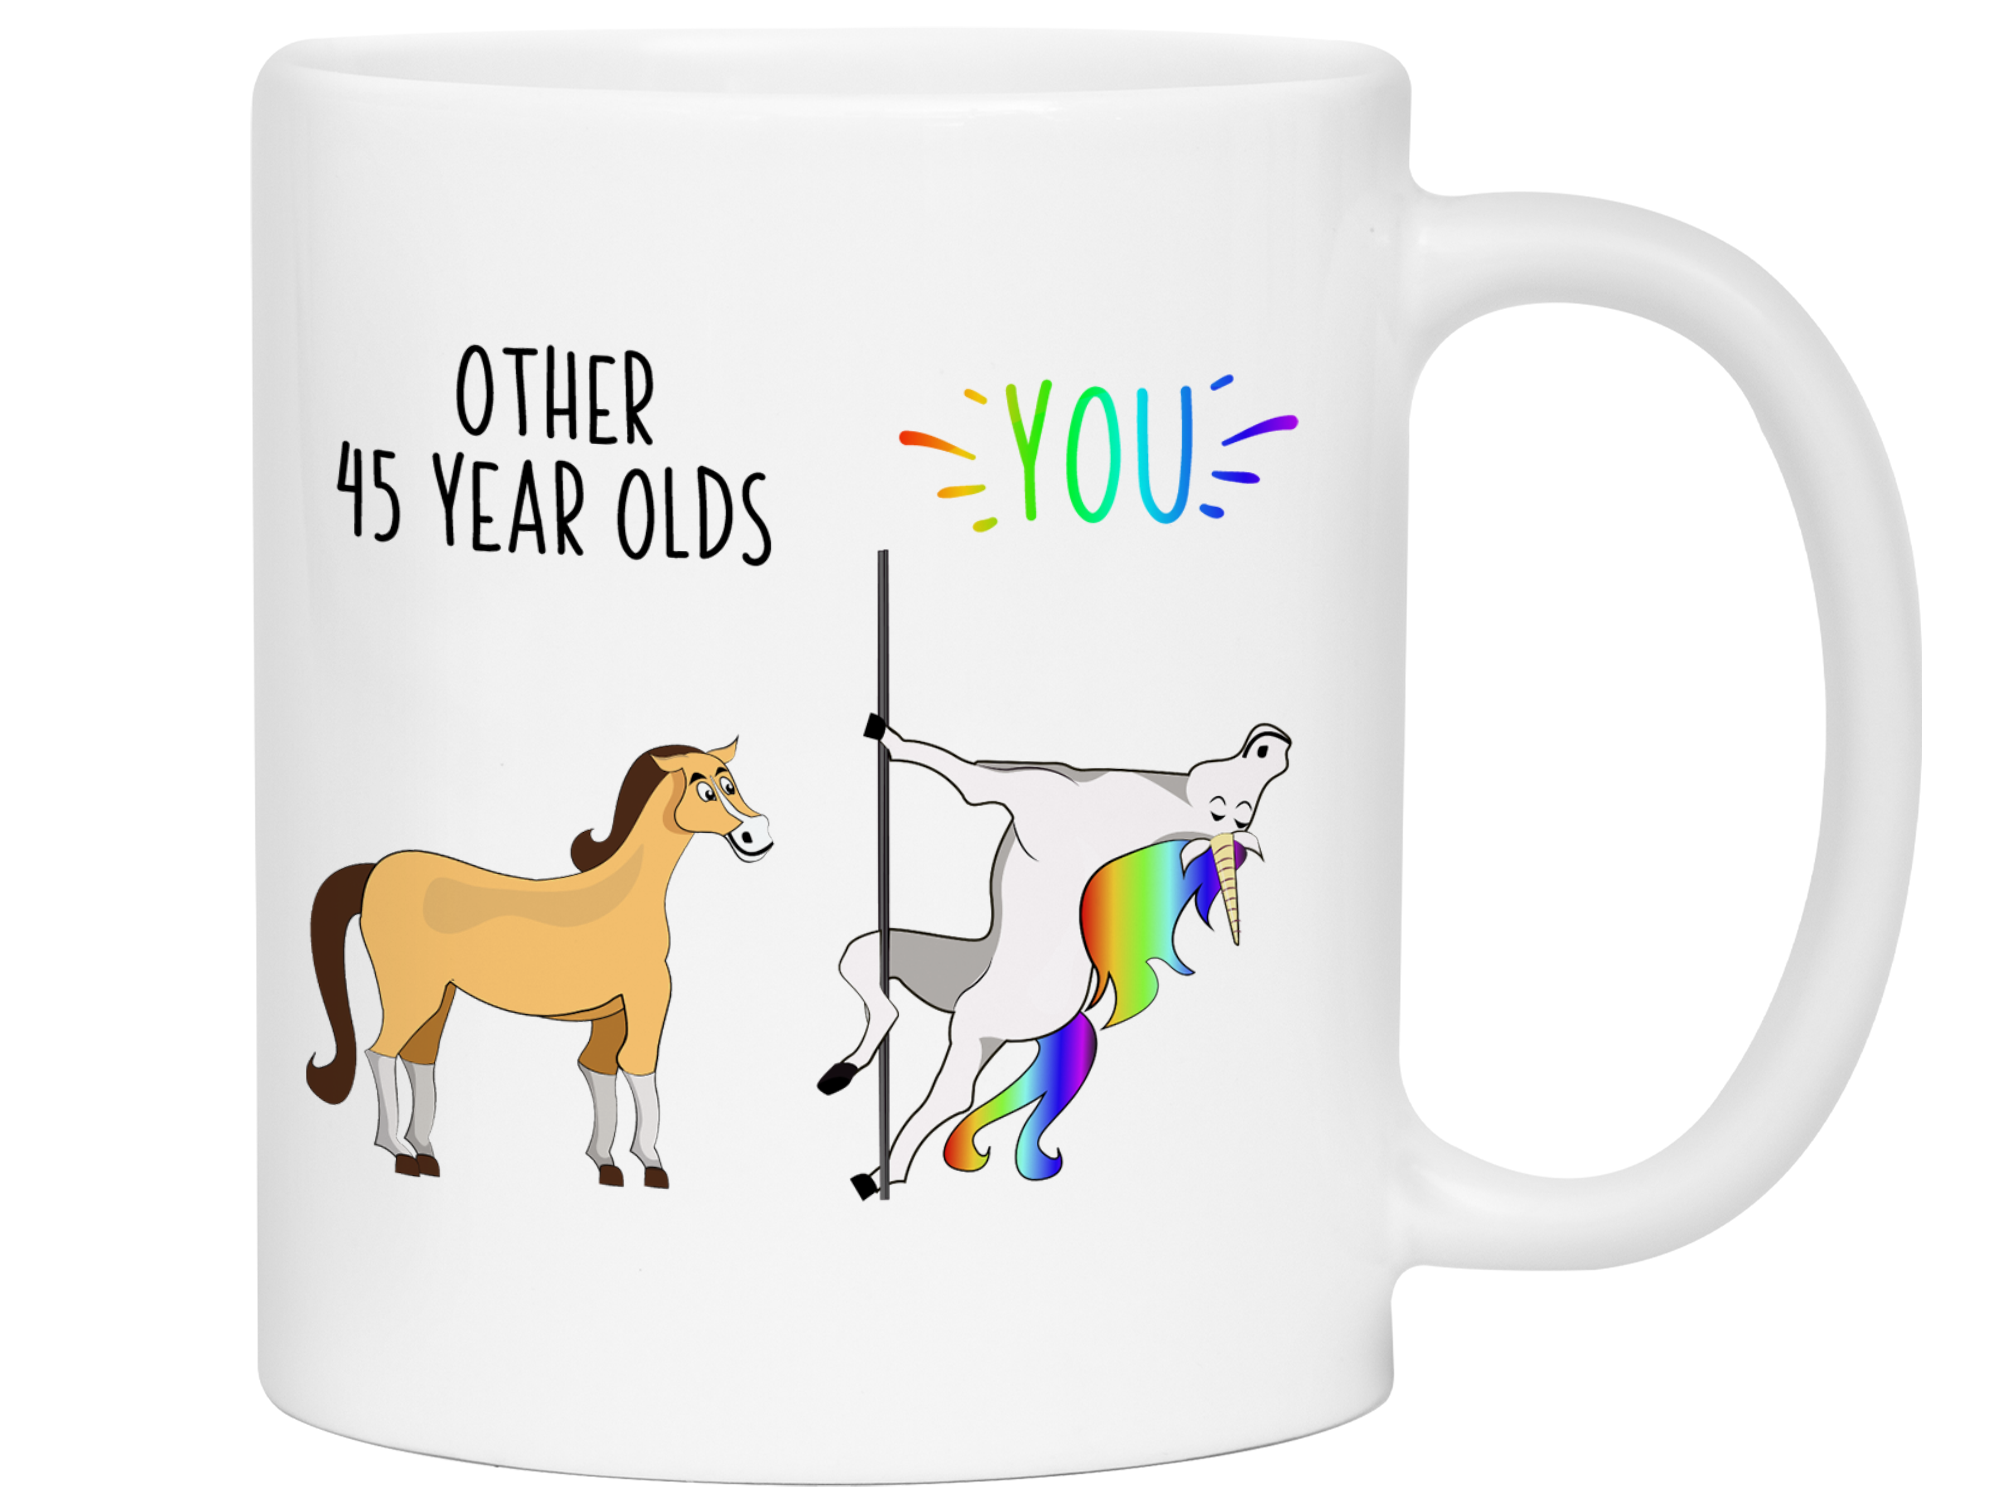 45th Birthday Gifts - Other 45 Year Olds You Funny Unicorn Coffee Mug